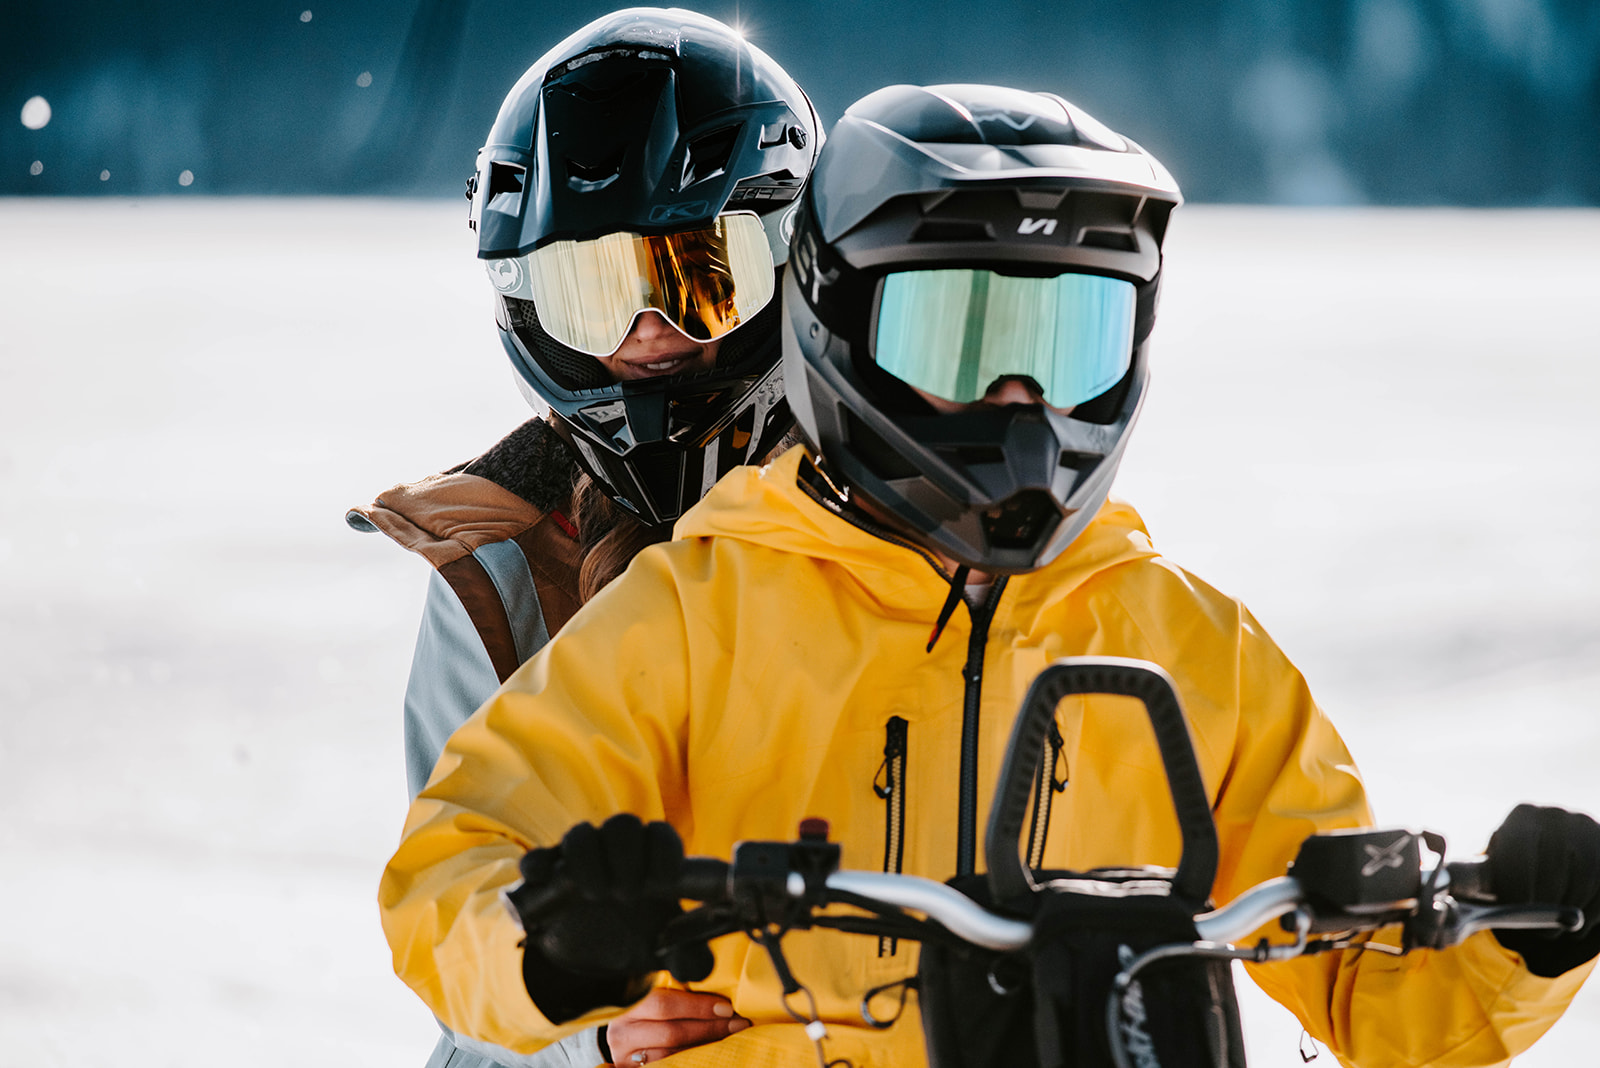 A couple riding a snowmobile together